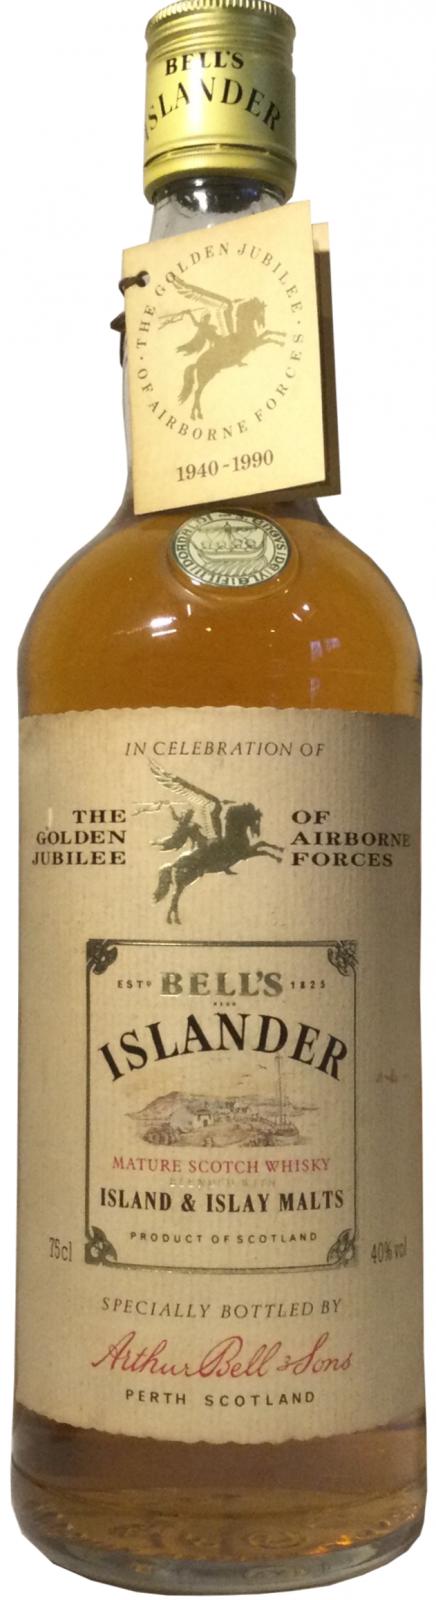 Bell's Islander Island & Malts In Celebration of the Golden Jubilee of the Airborne Forces 1940 1990 40% 700ml